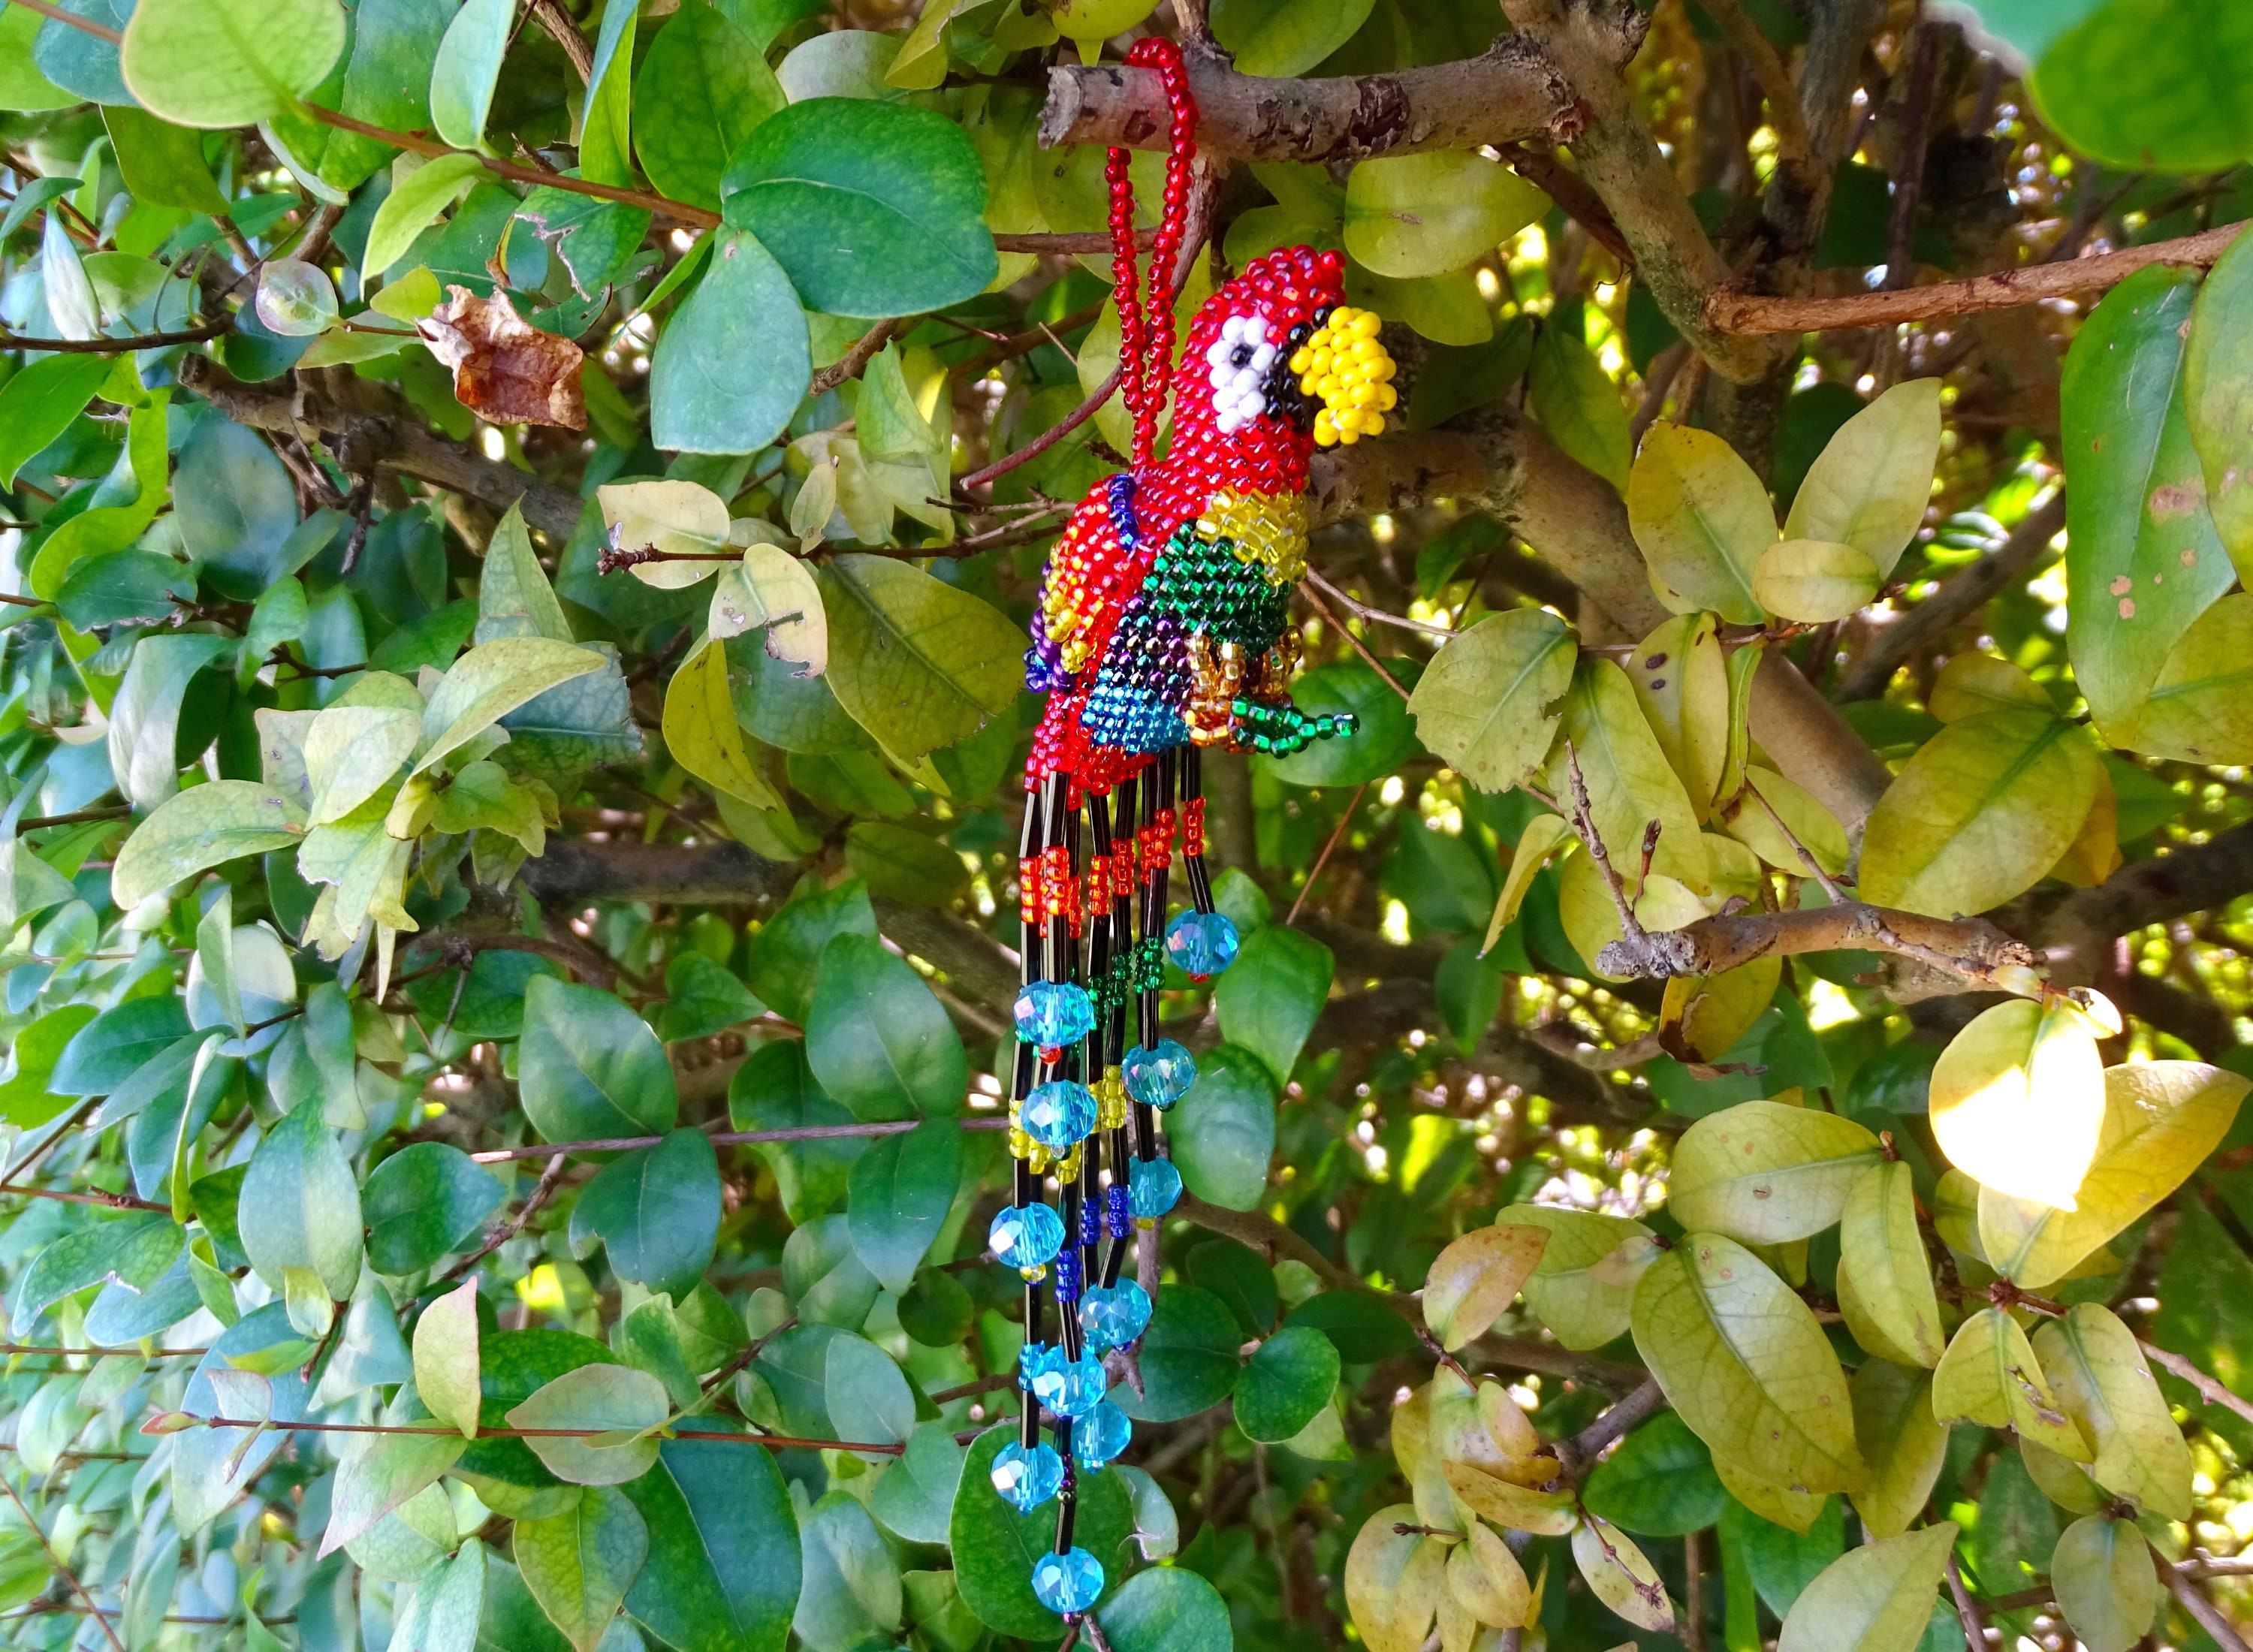 Small Animal Beads For Making Homemade Bird Toys – All Parrot Products